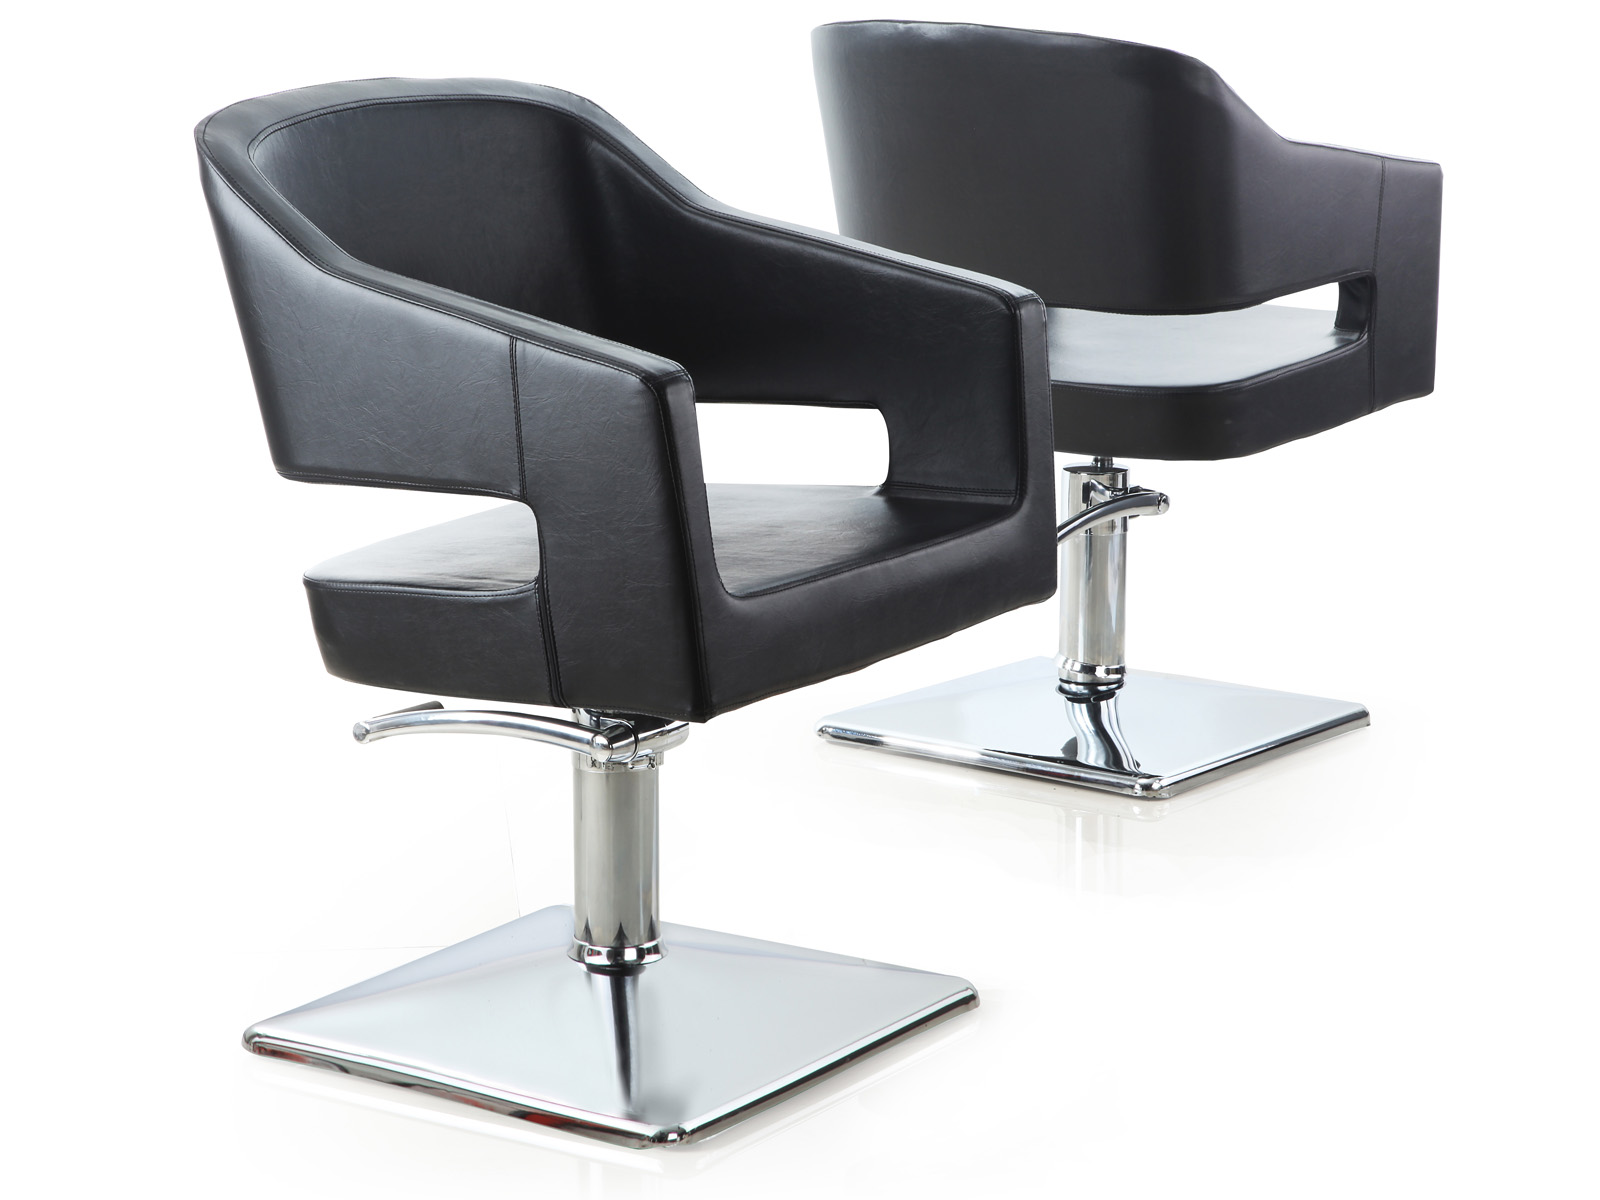 Chair : Awesome Inspiration Idea Spa Chairs With New Range Of Salon ...